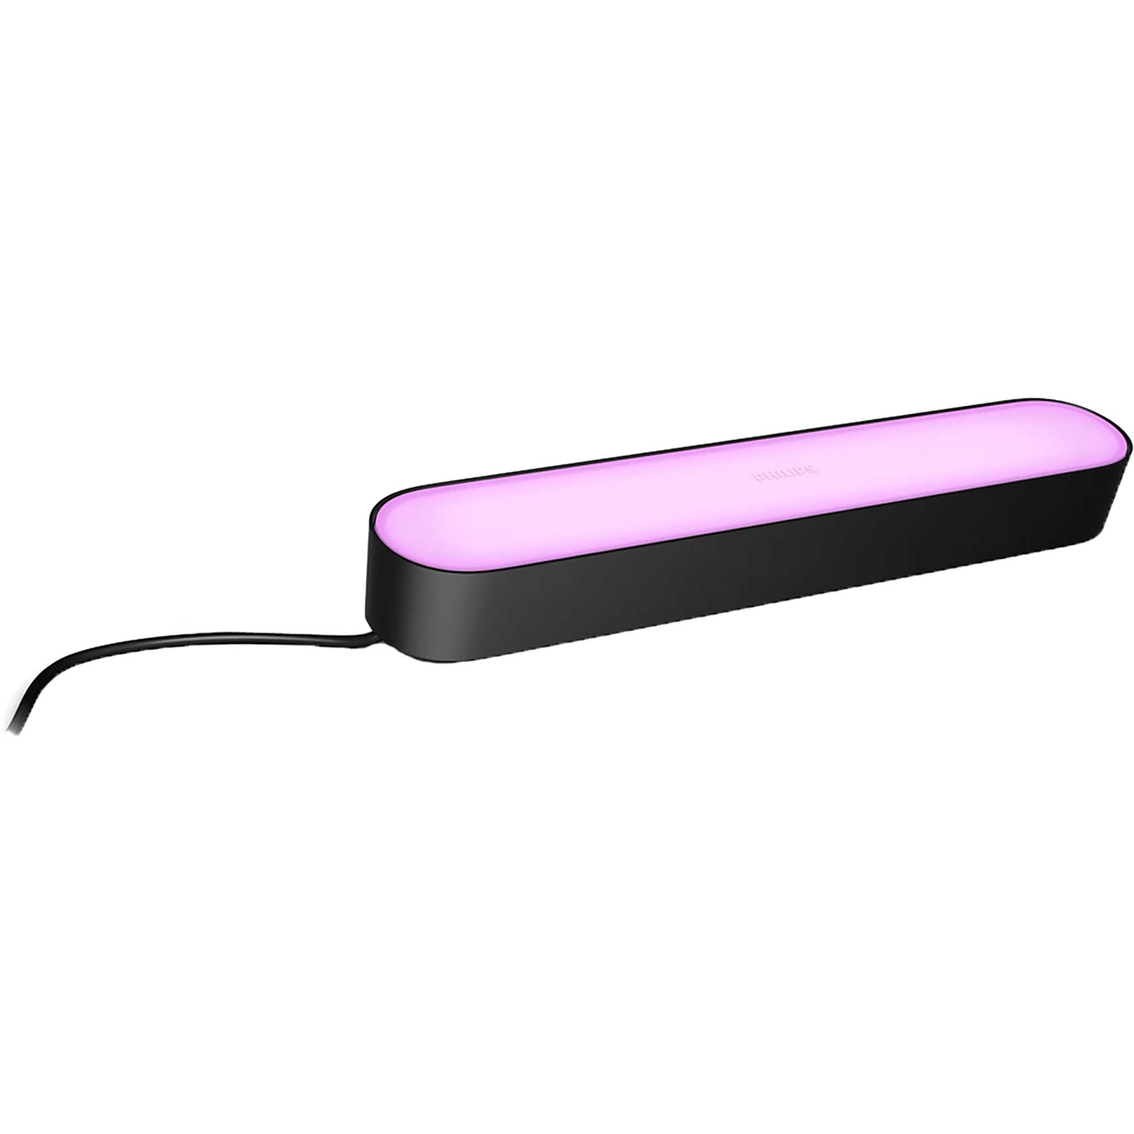 Philips Hue Play Light Bar Extension Base Pack, Black - Image 3 of 7